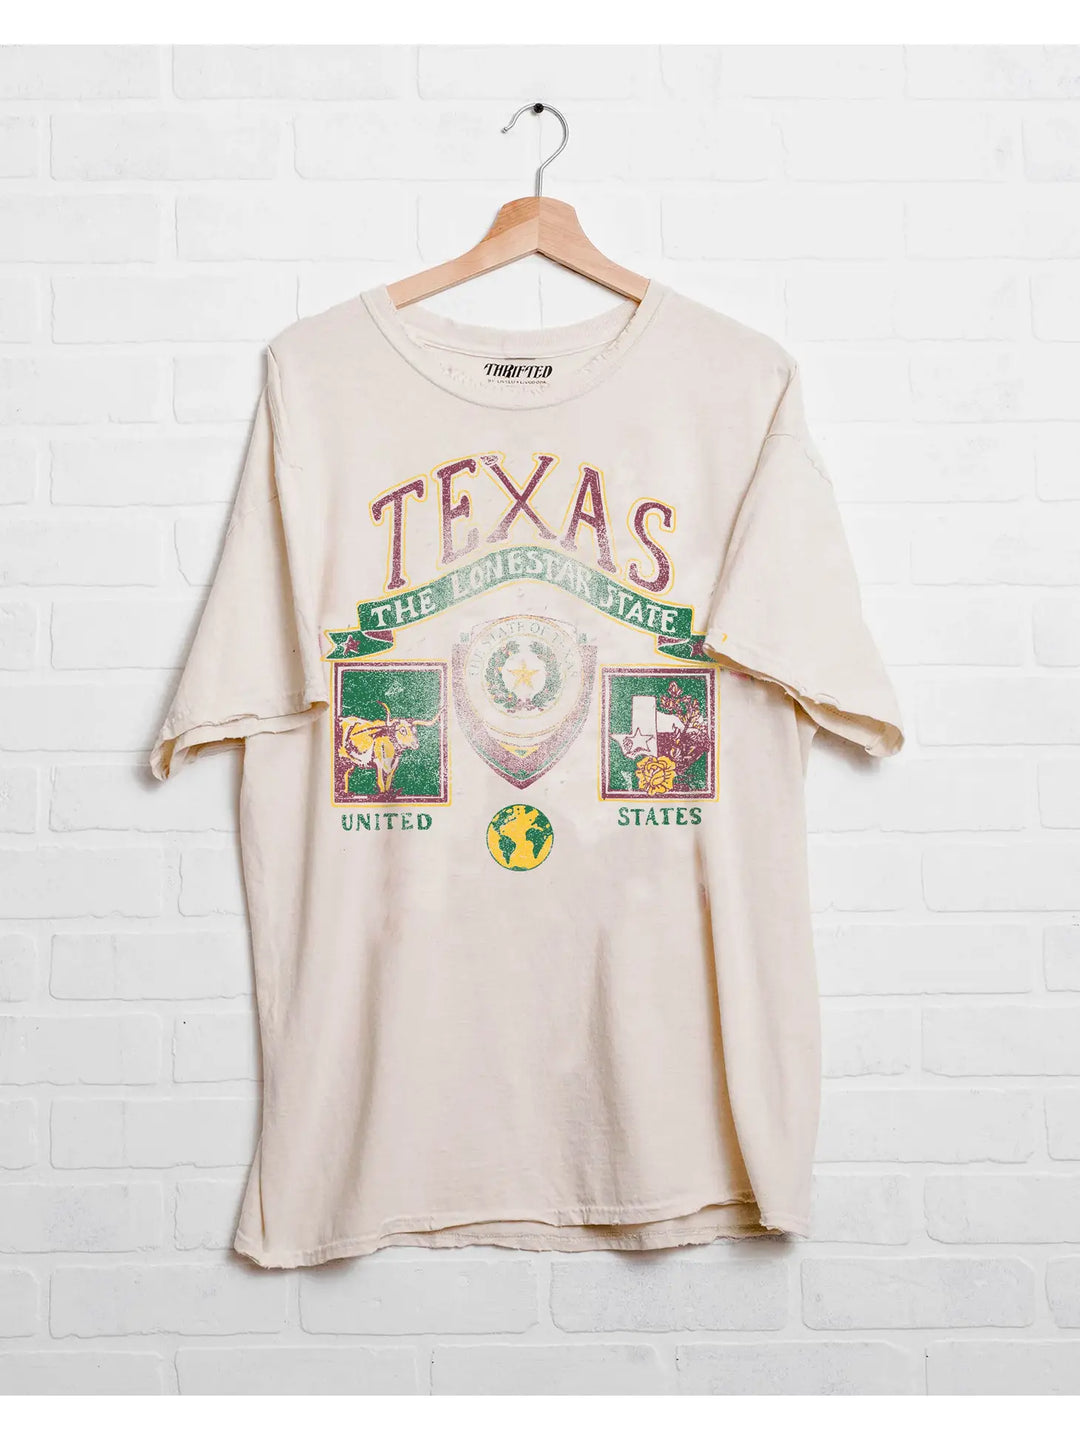 The Texas Patch Thrifted Tee